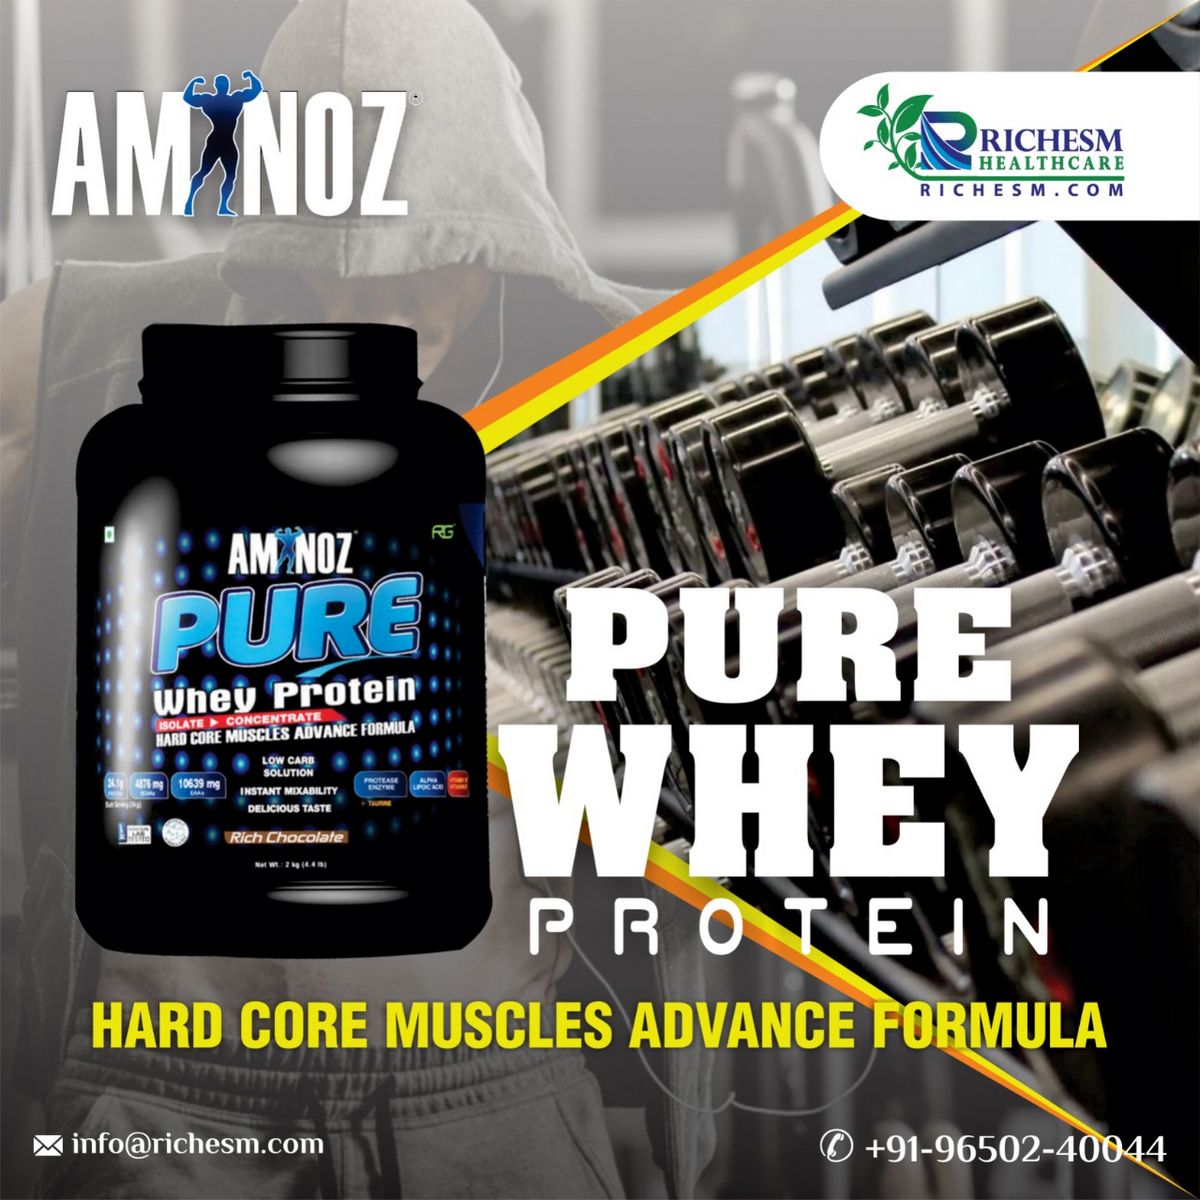 Advance Whey Protein to Build Muscles Fast Health and Nutrition Advance Whey Protein to Build Muscles Fast